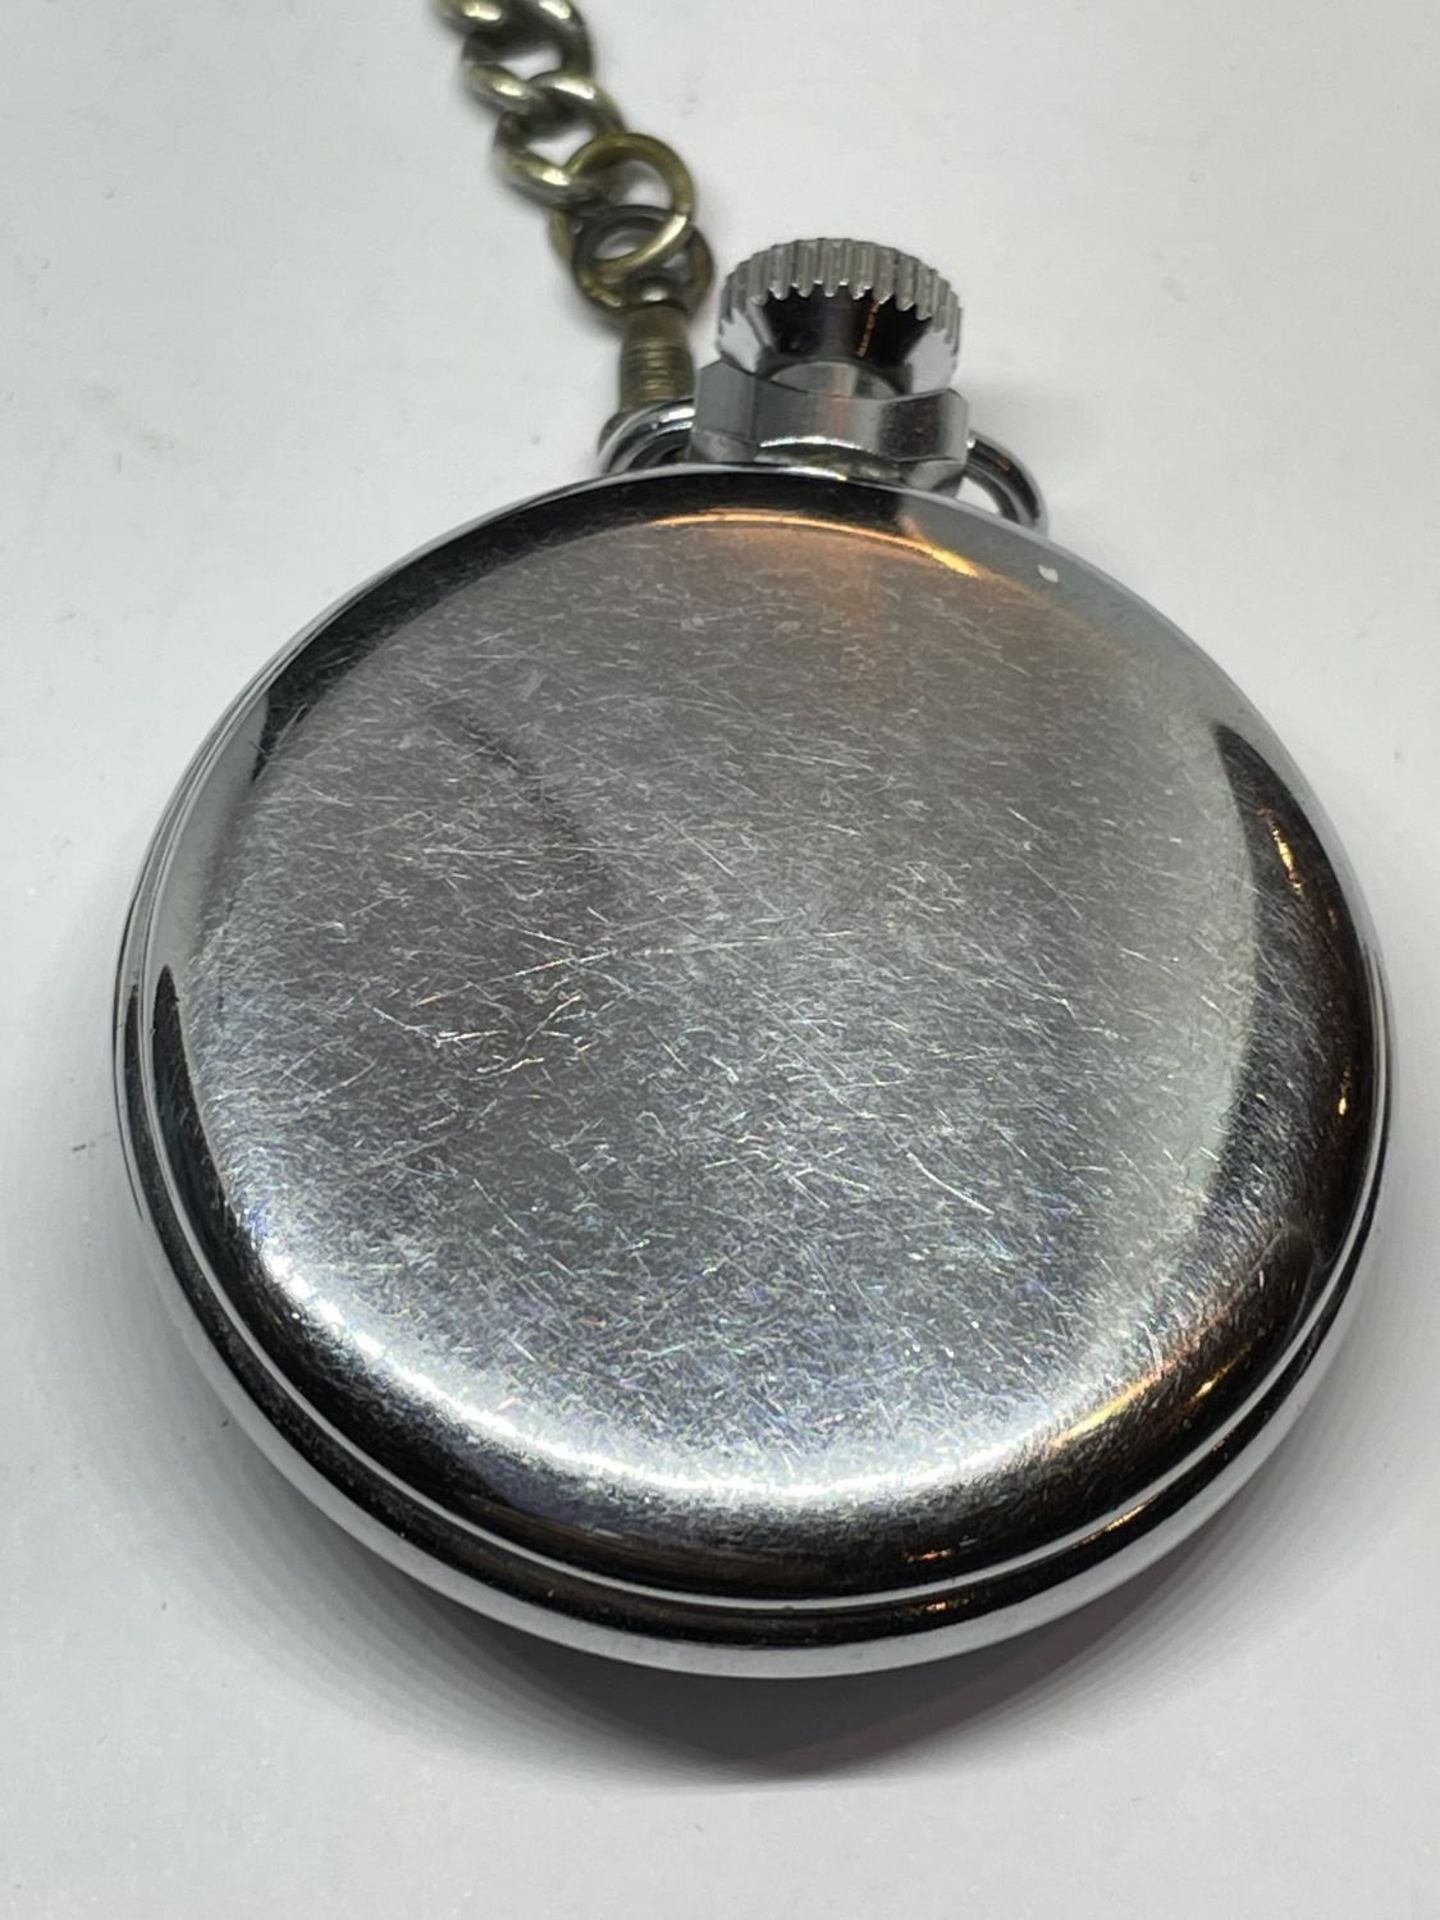 A SMITHS POCKET WATCH AND CHAIN - Image 3 of 3